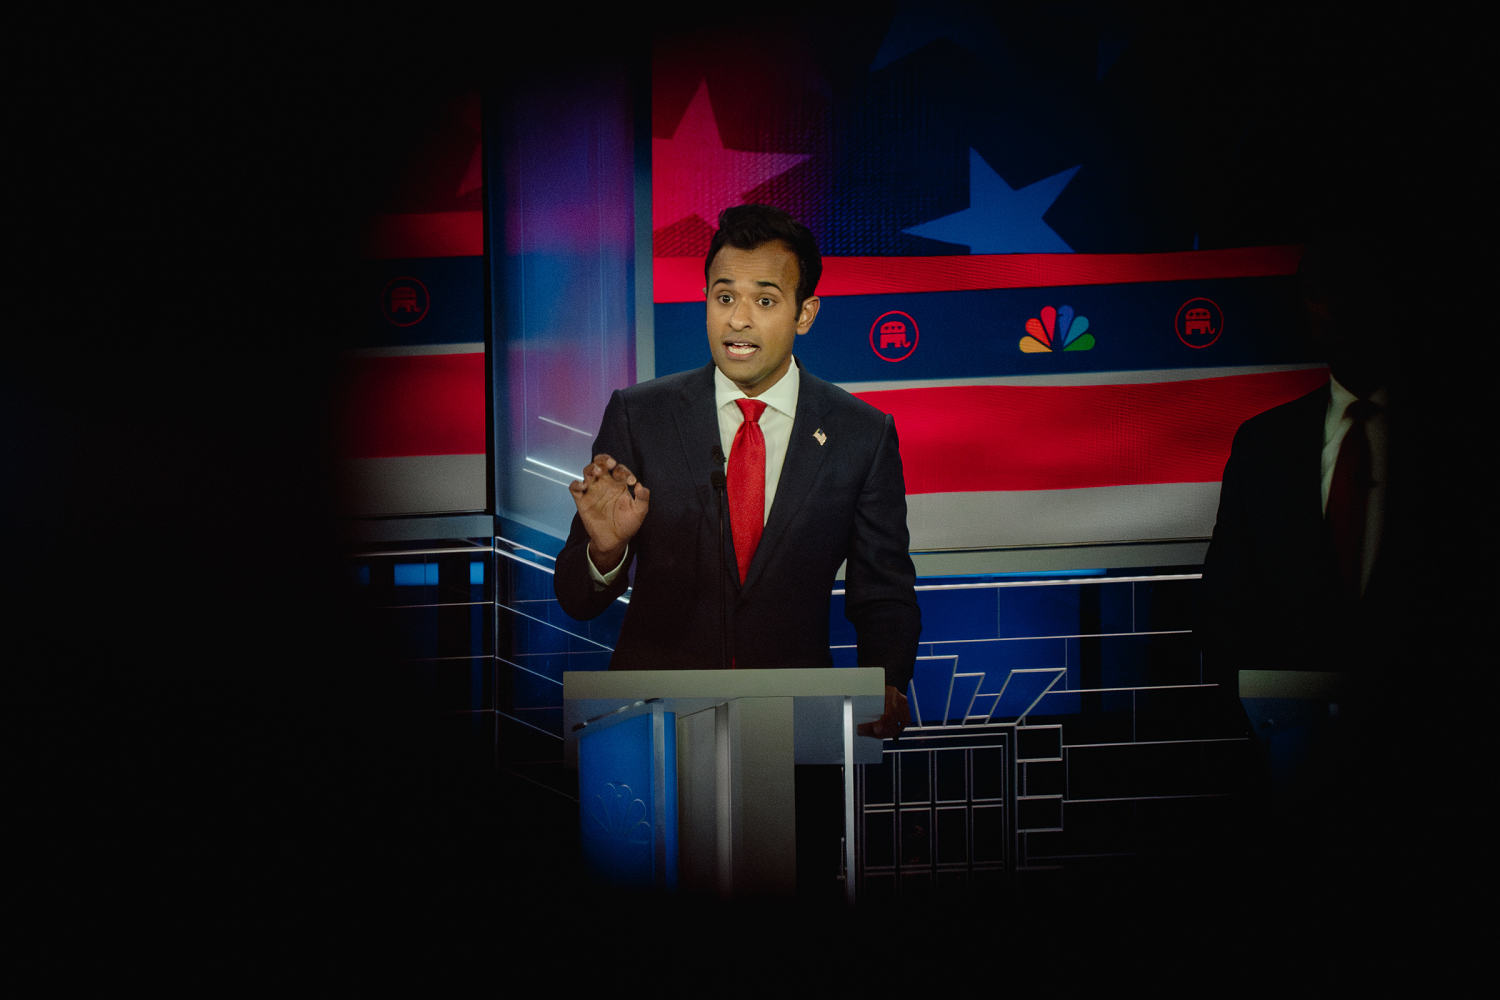 Vivek Ramaswamy's campaign stops all TV ad spending less than a month before Iowa and New Hampshire